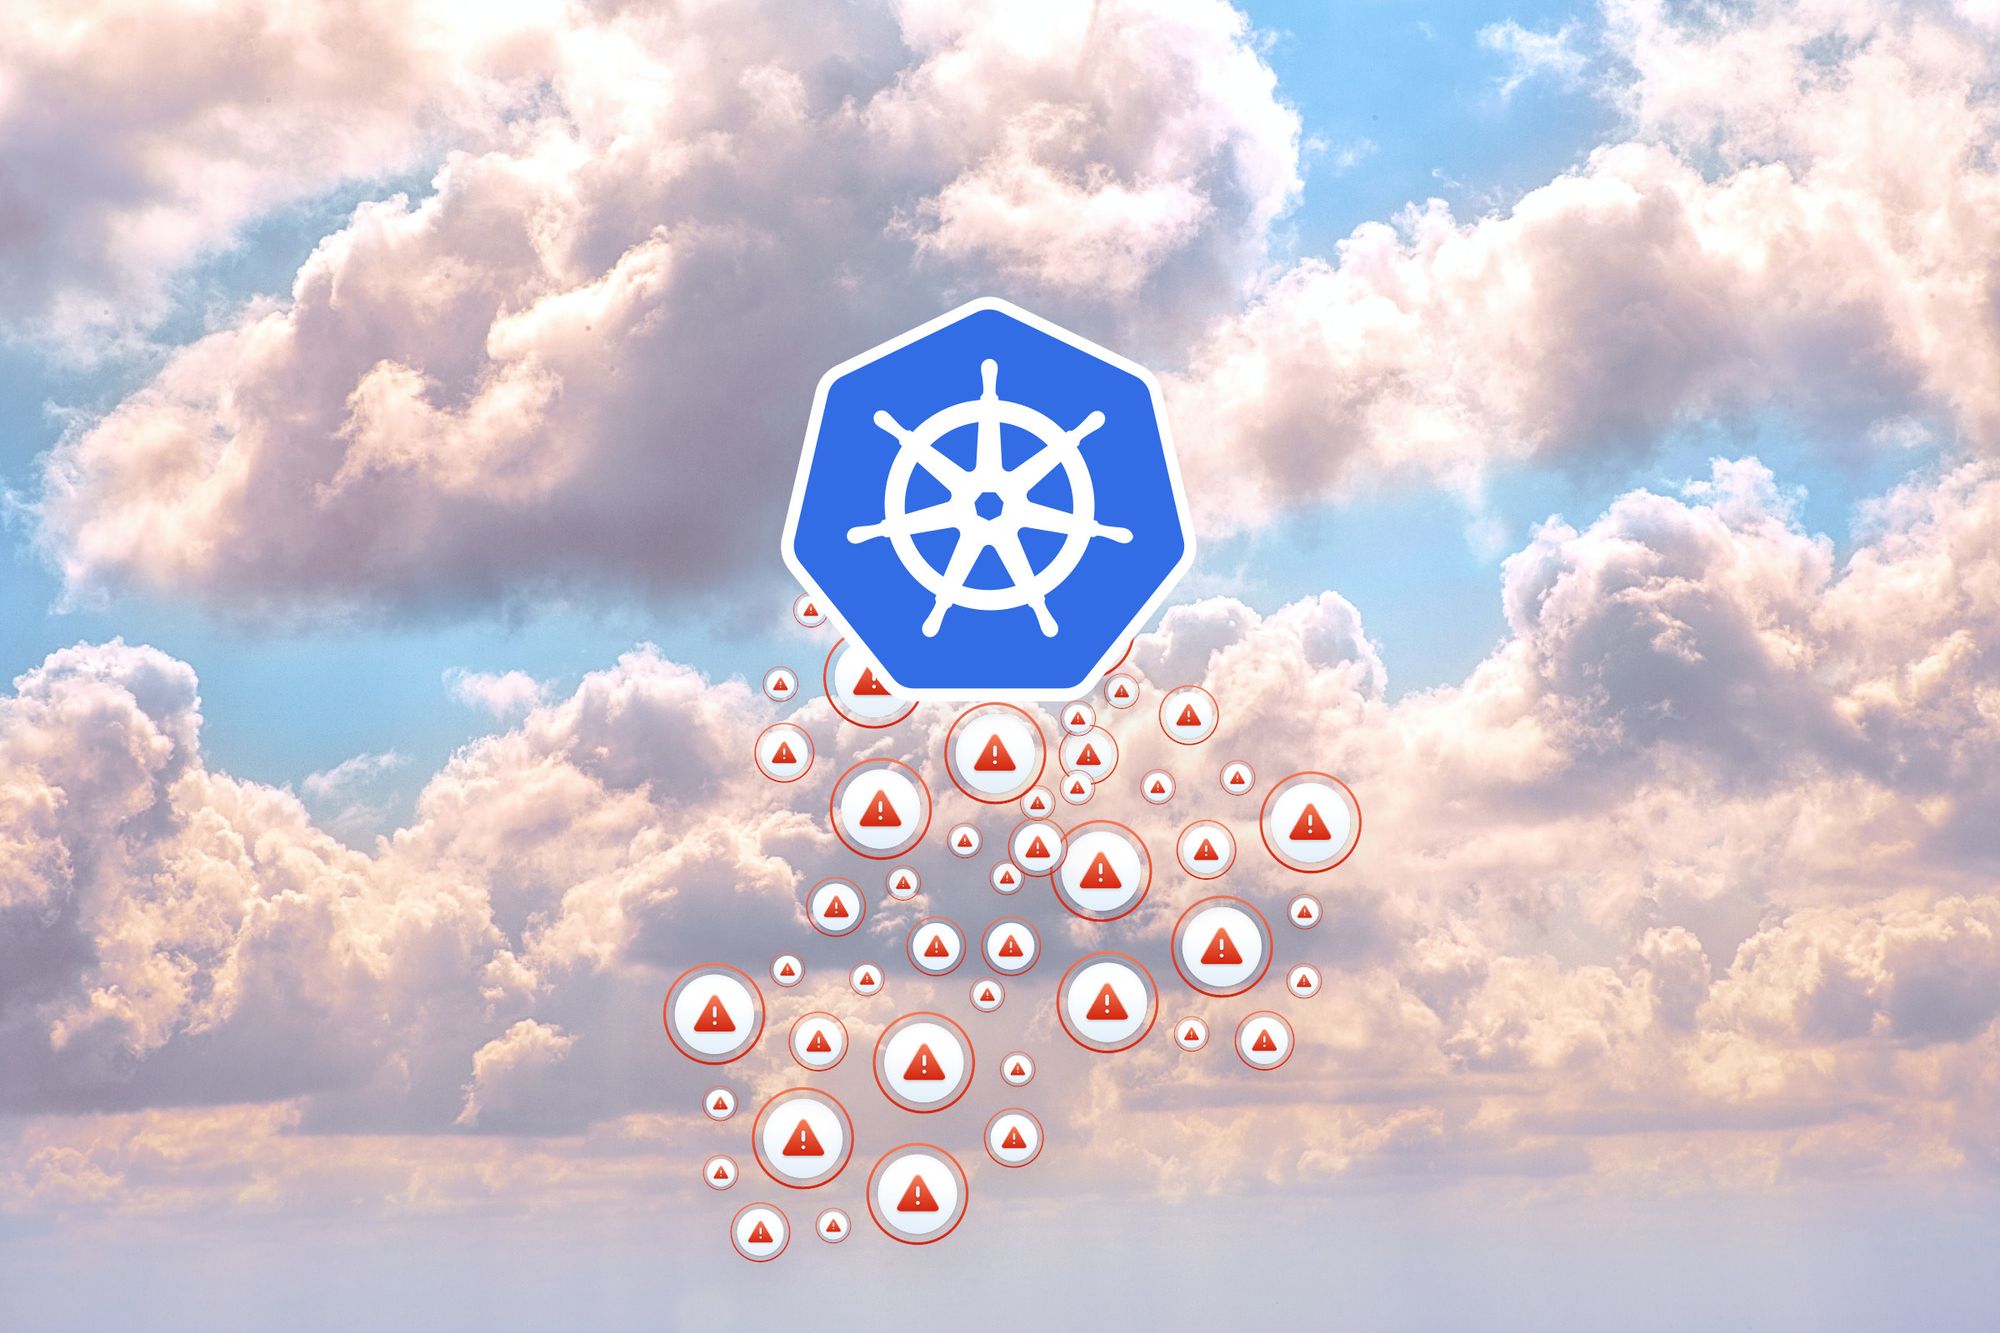 Finding And Fixing Common Kubernetes Problems